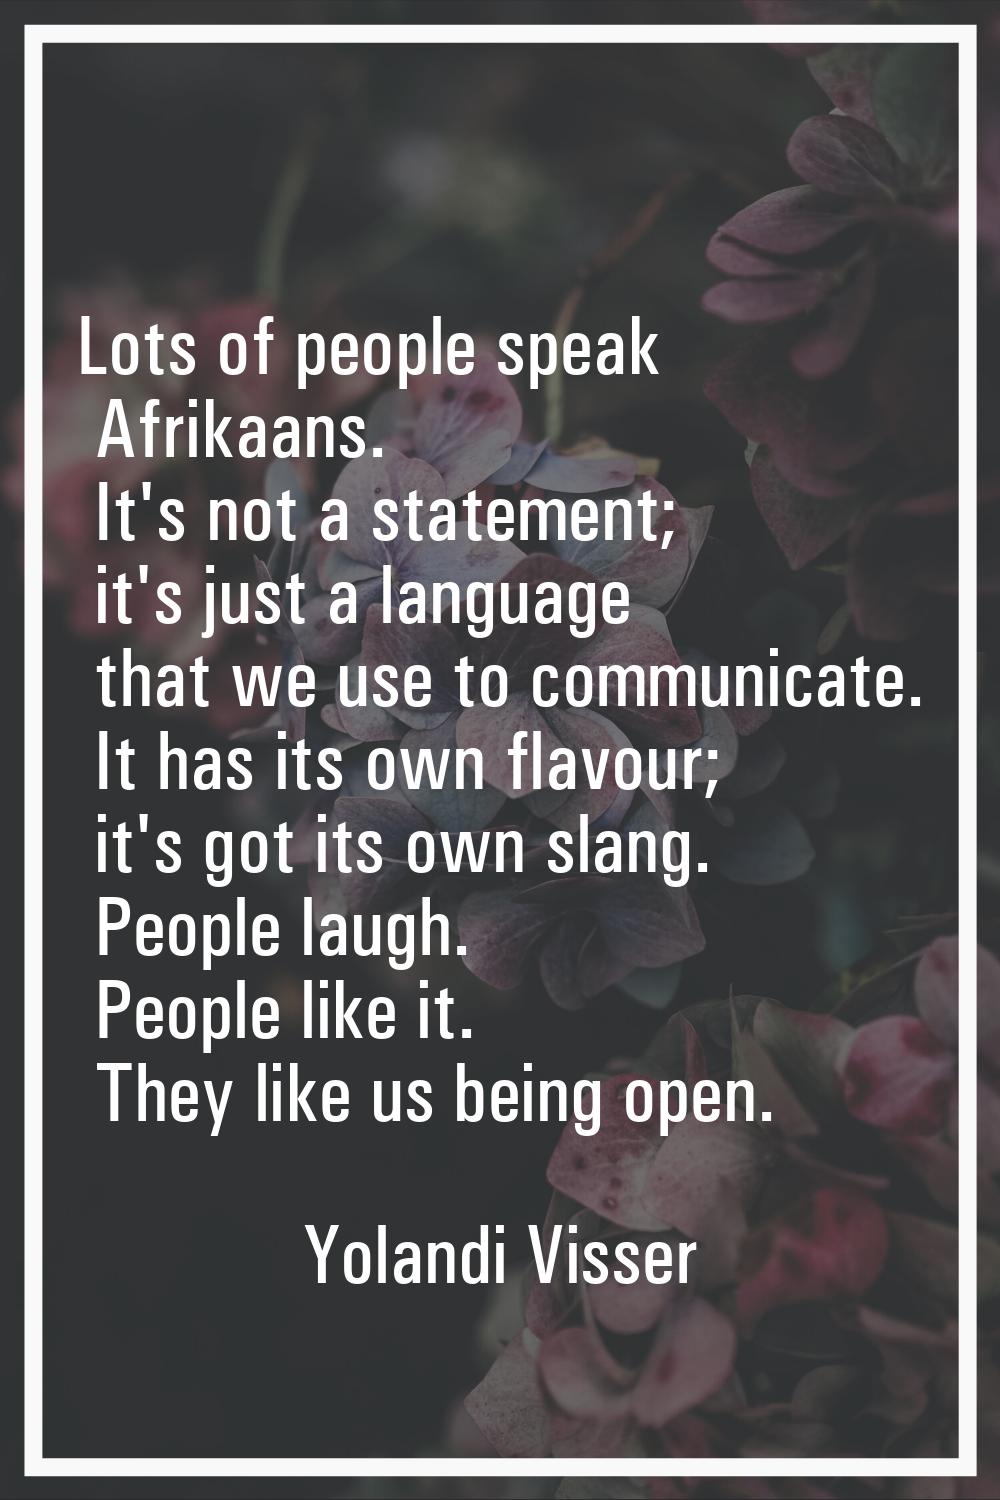 Lots of people speak Afrikaans. It's not a statement; it's just a language that we use to communica